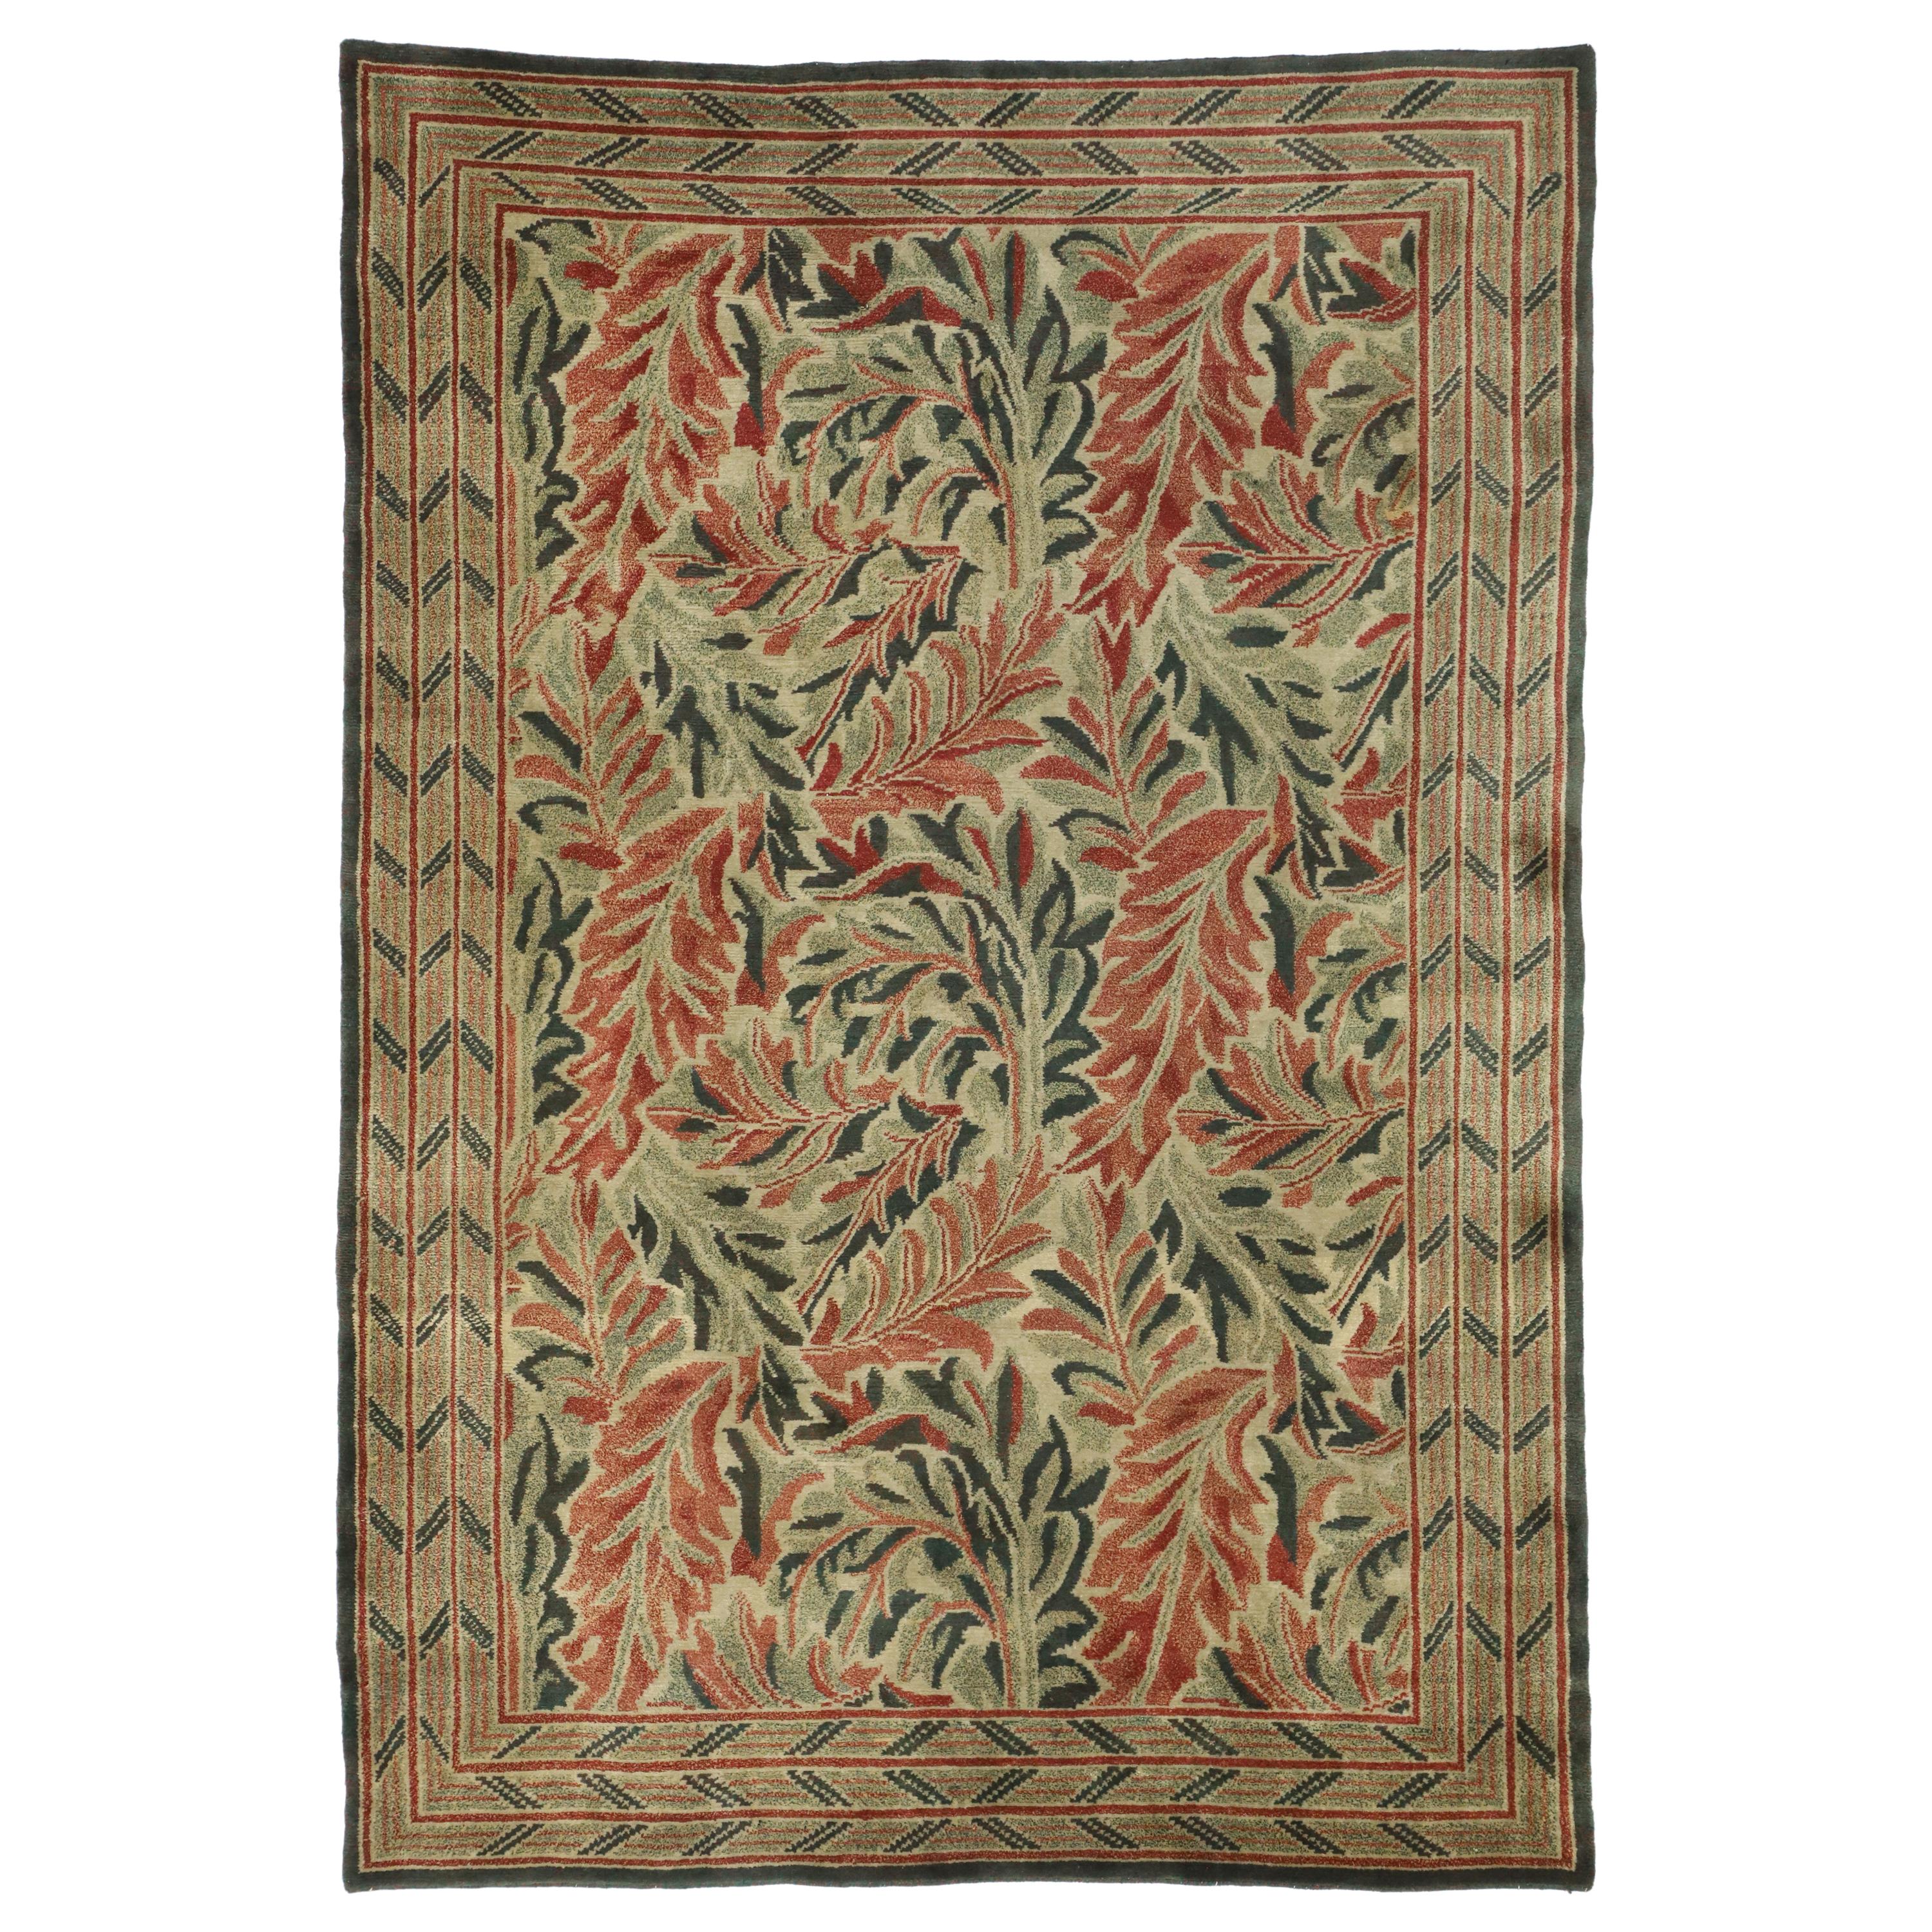 Vintage Swedish William Morris Acanthus Inspired Rug with Arts & Crafts Style